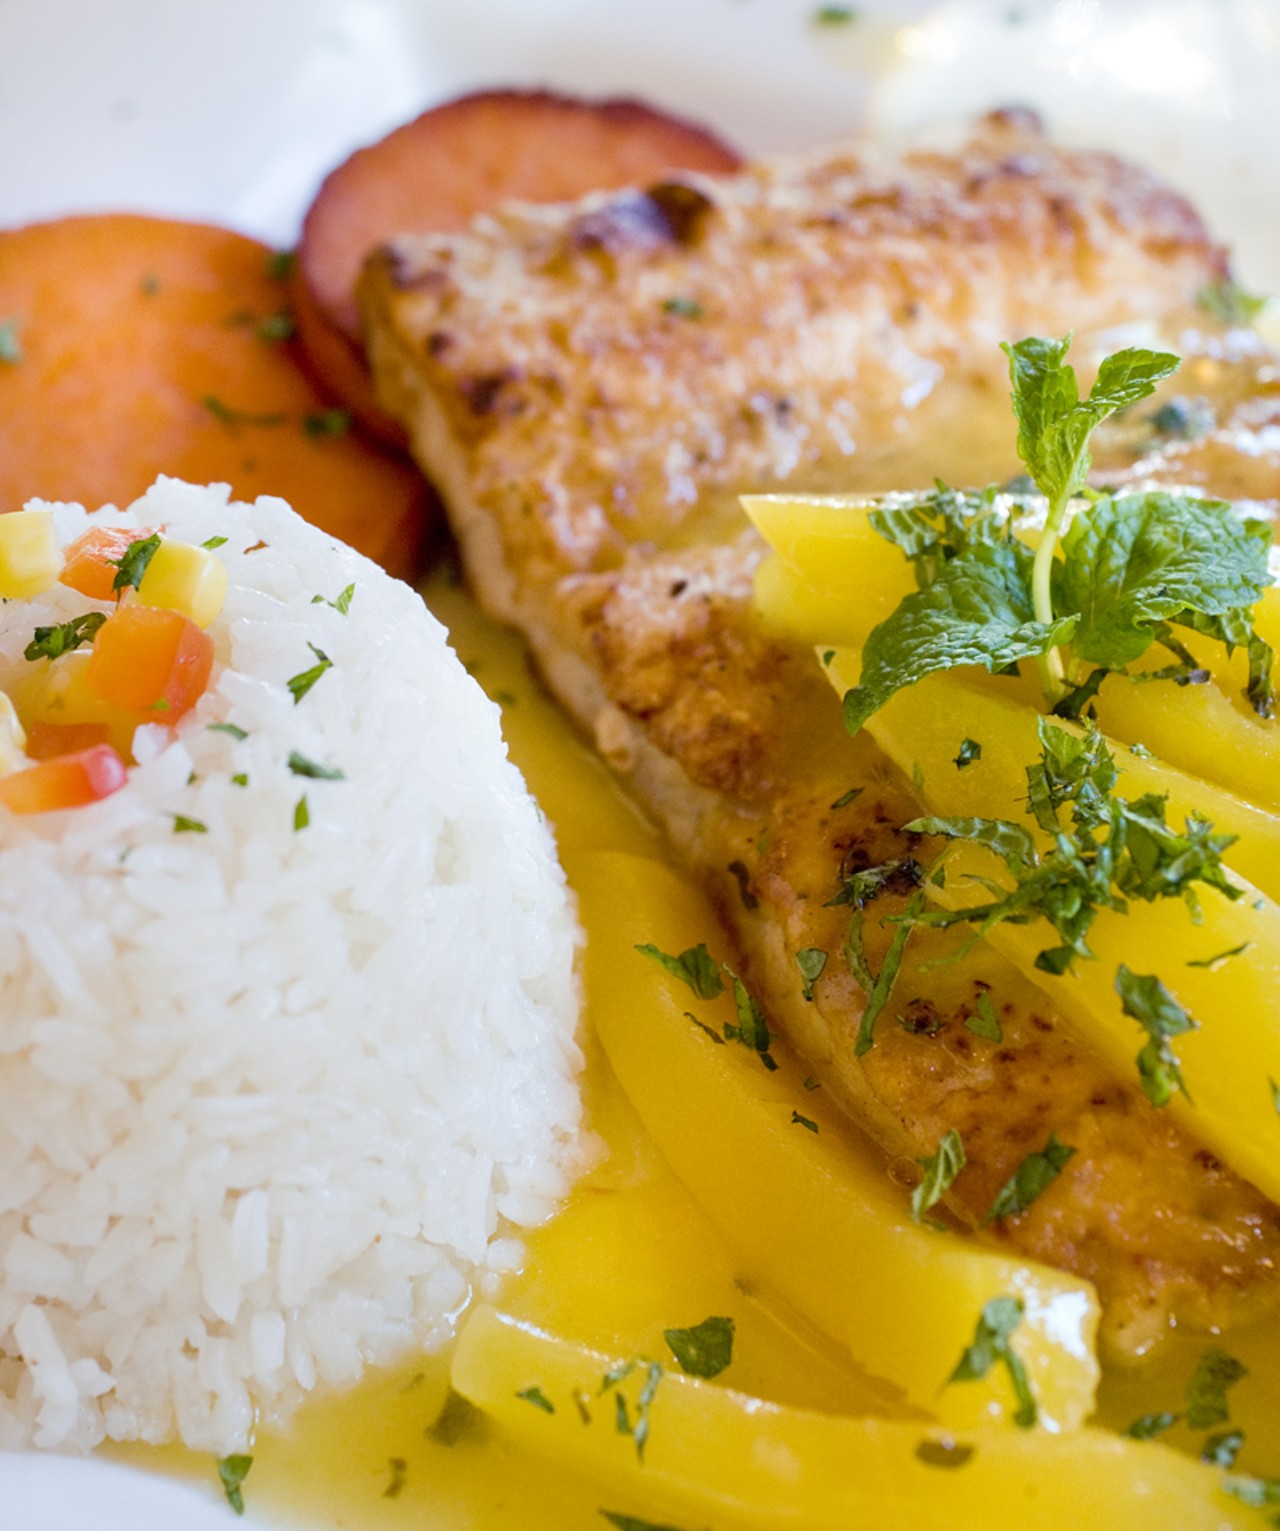 A special, the pescado apasionado, or the passionate fish. A fillet of Mahi-Mahi is saut&eacute;ed and topped with a mango and passion fruit sauce. It is then served with rice and golden sweet potatoes.